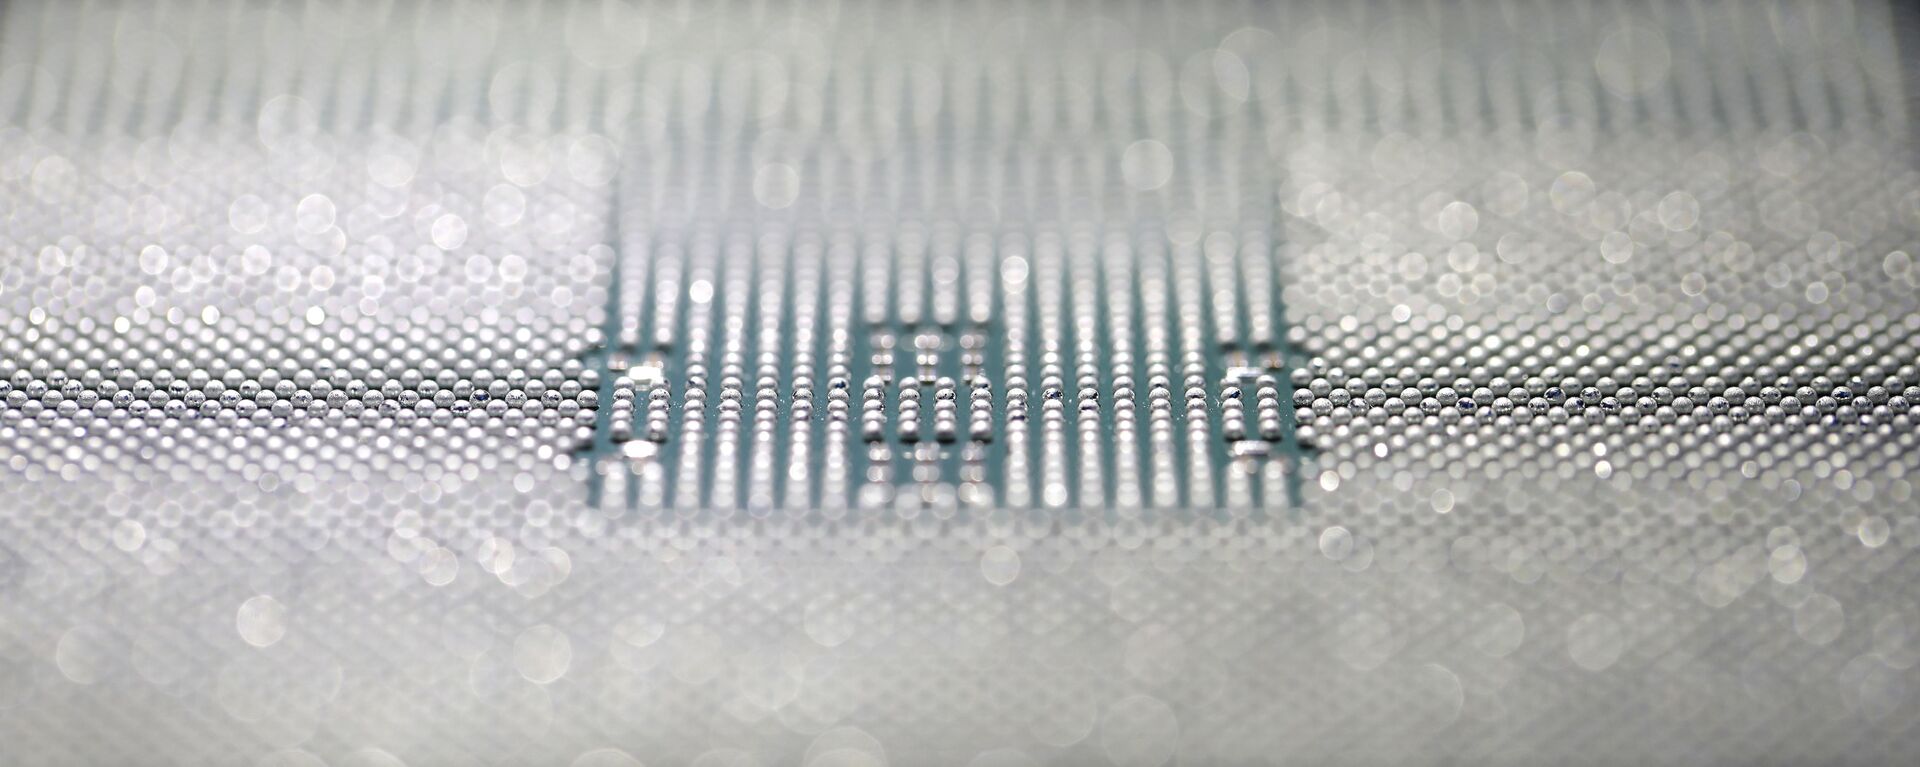 A Kunpeng 920 chip is displayed during an unveiling ceremony in Shenzhen, China, Monday, Jan. 7, 2019. Chinese telecom giant Huawei unveiled a processor chip for data centers and cloud computing as it expands into an emerging global market despite Western warnings the company might be a security risk.  - Sputnik International, 1920, 04.02.2021